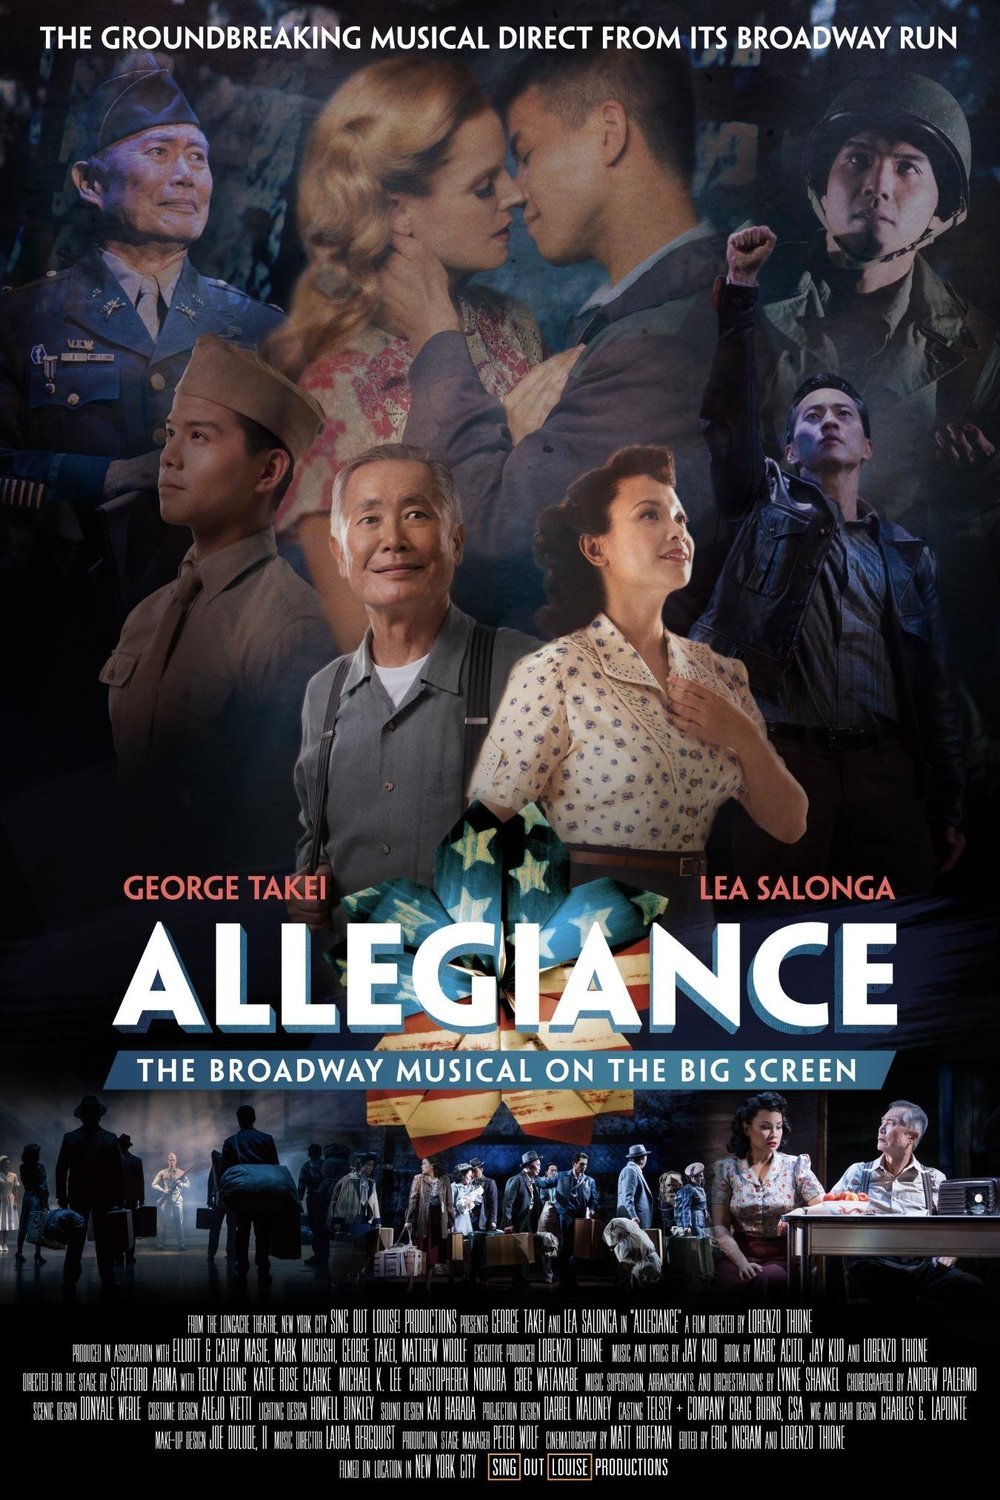 Poster of the movie George Takei's Allegiance